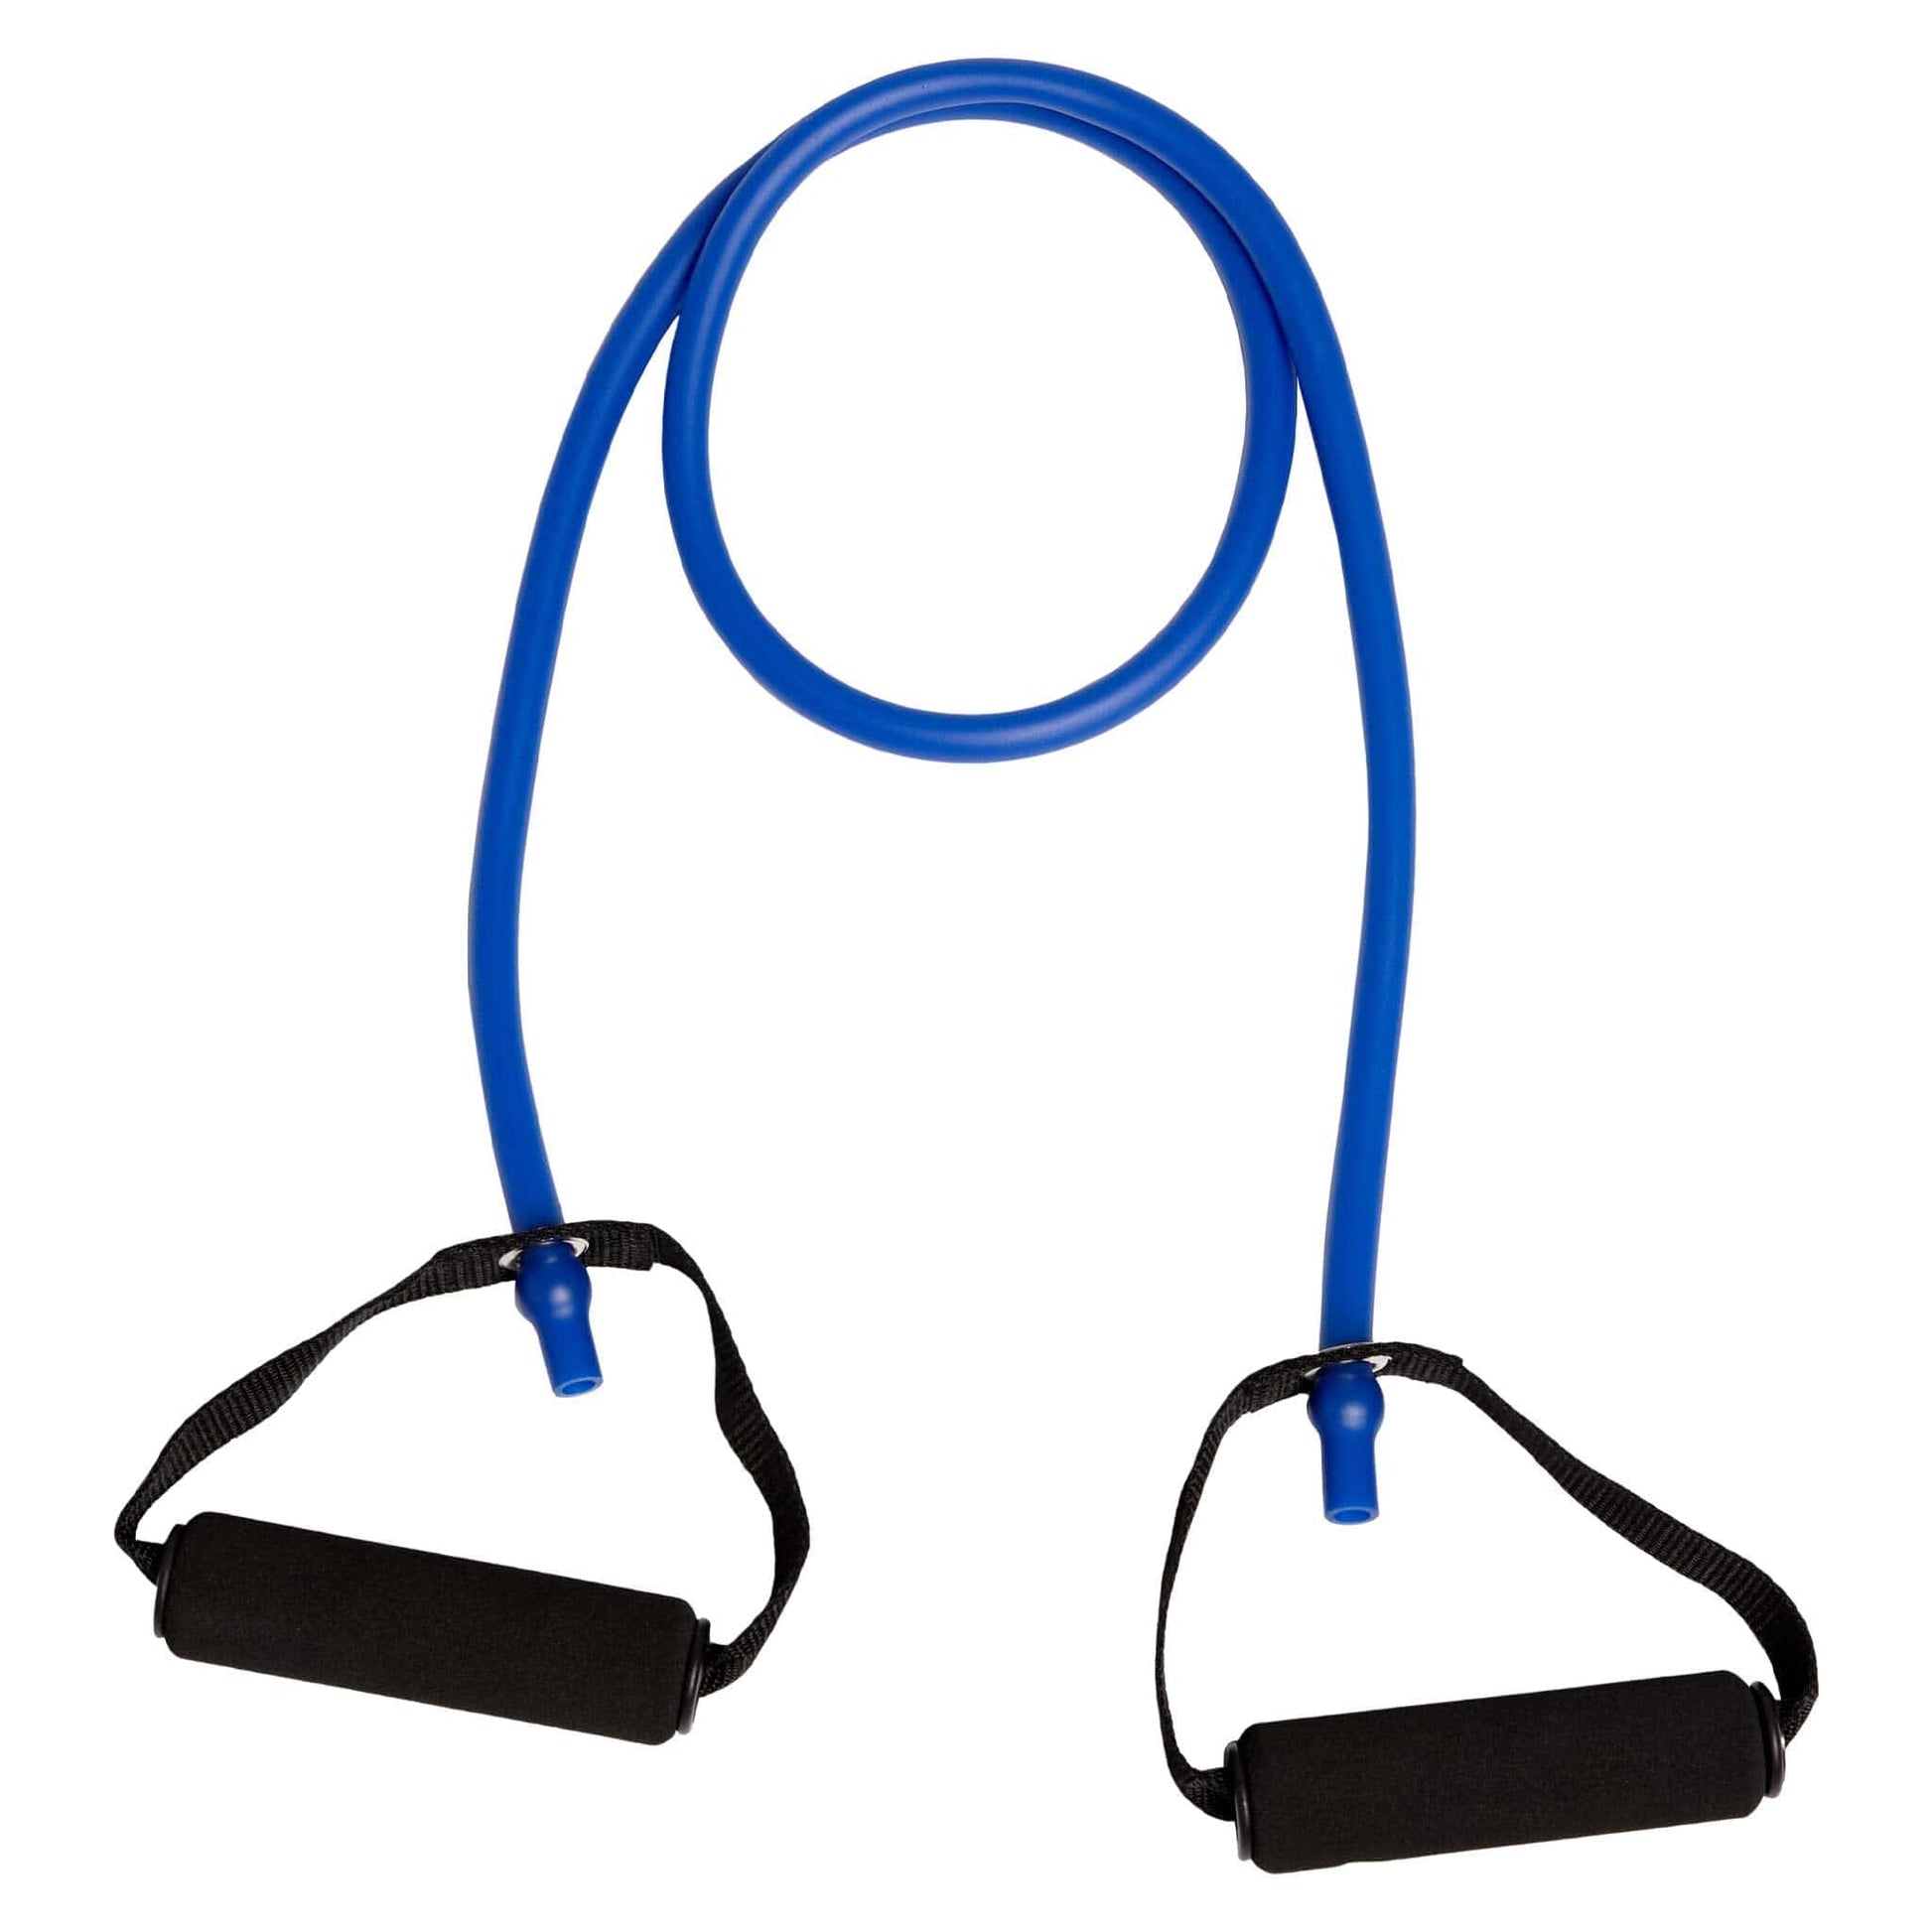 Eclipse Martial Art Supplies sporting goods Resistance Bands for Strength Training